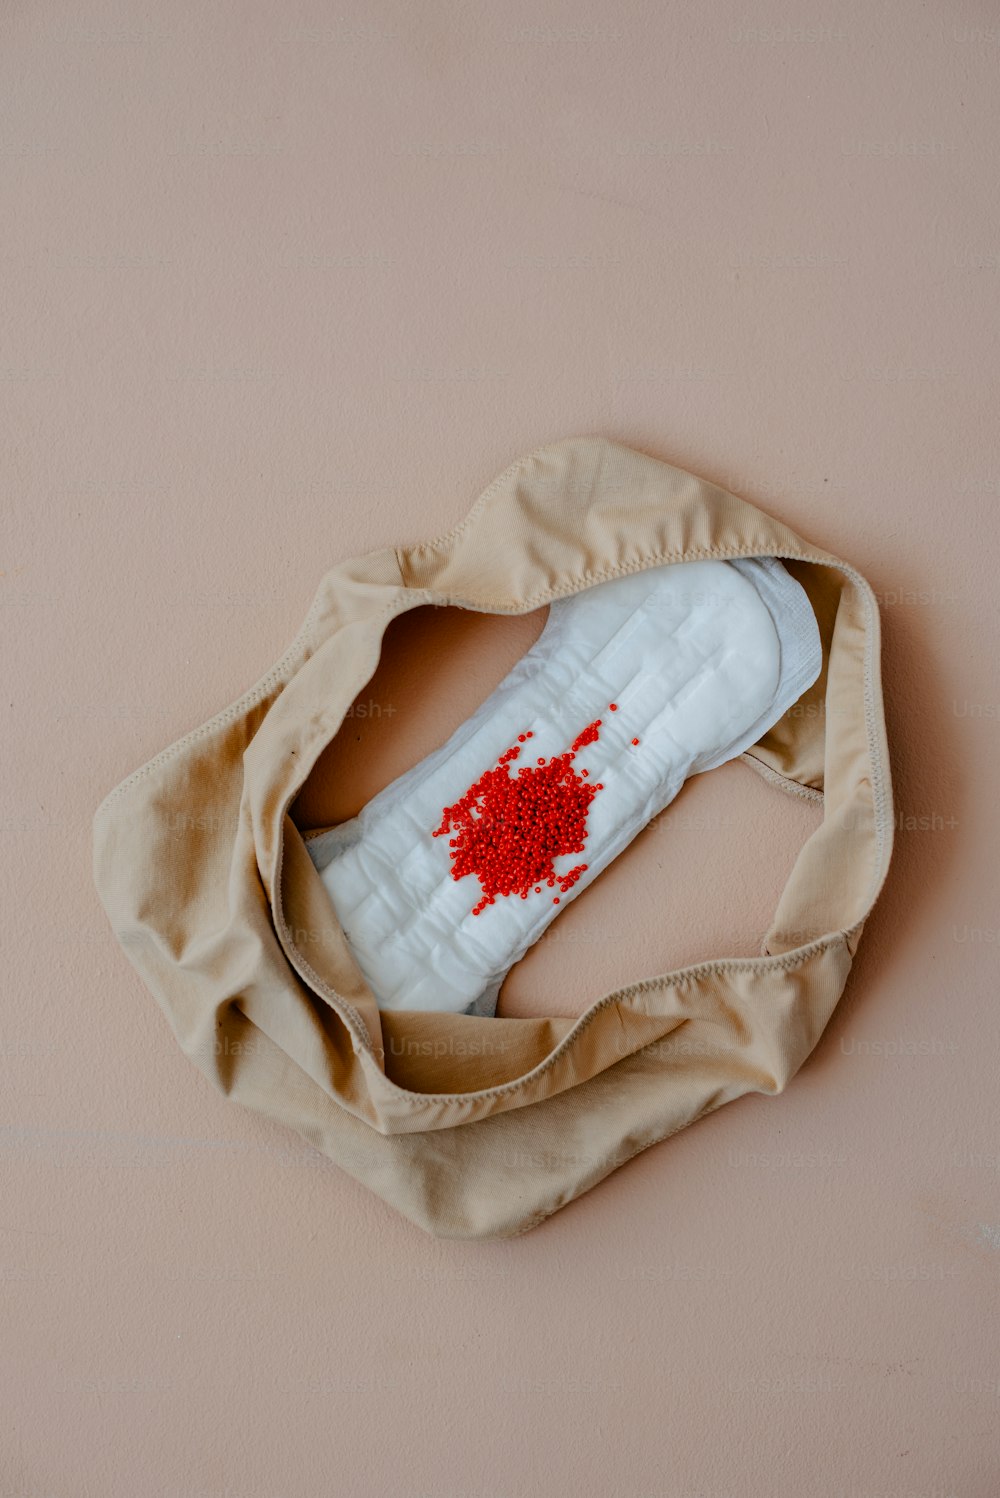 a pair of white shoes with red splatters on them